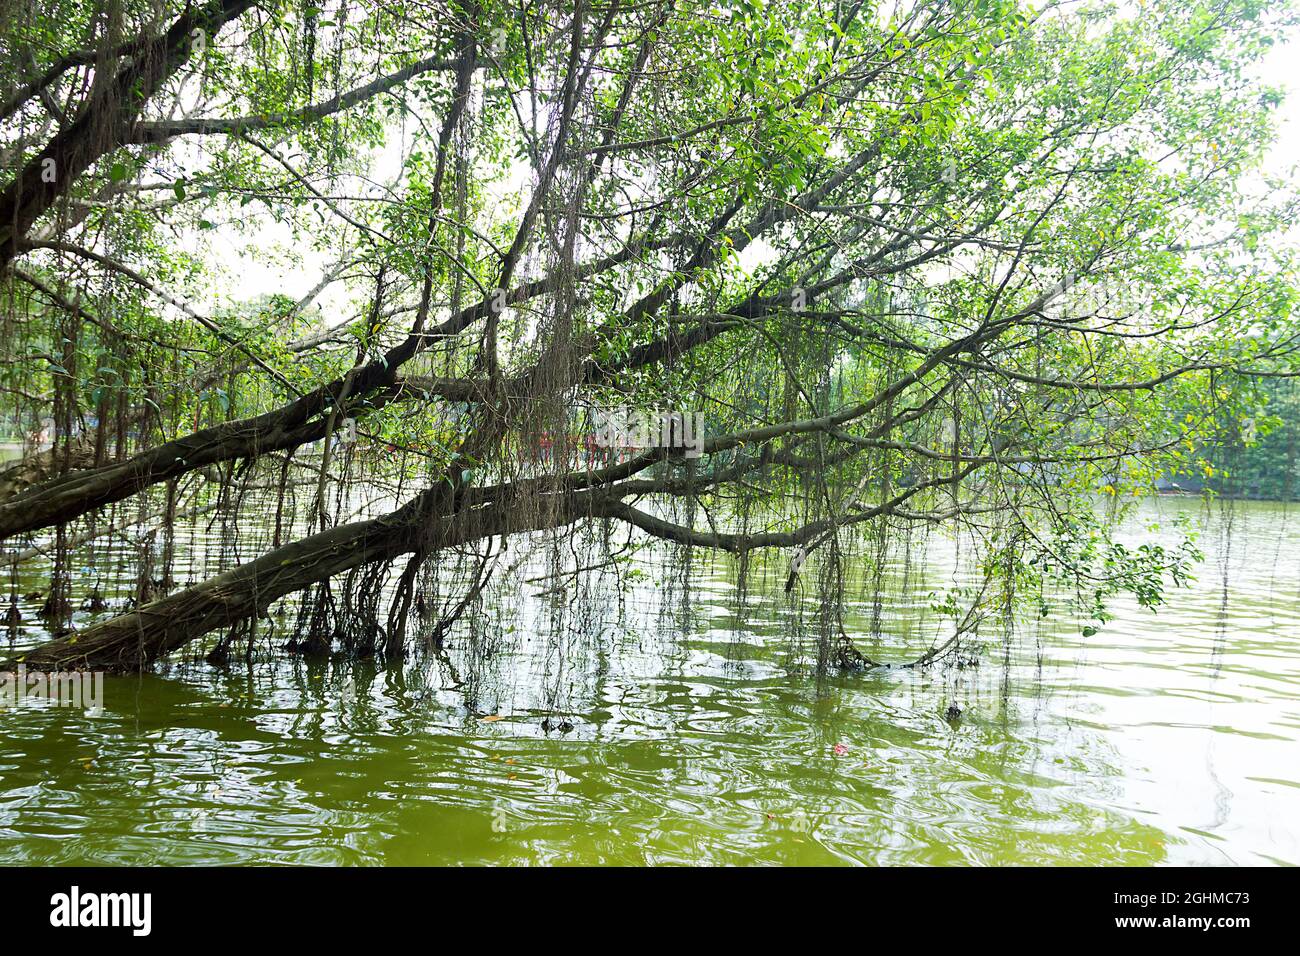 Aerating root; pneumatophore root - species of trees from the mangrove forest. Vietnam Stock Photo